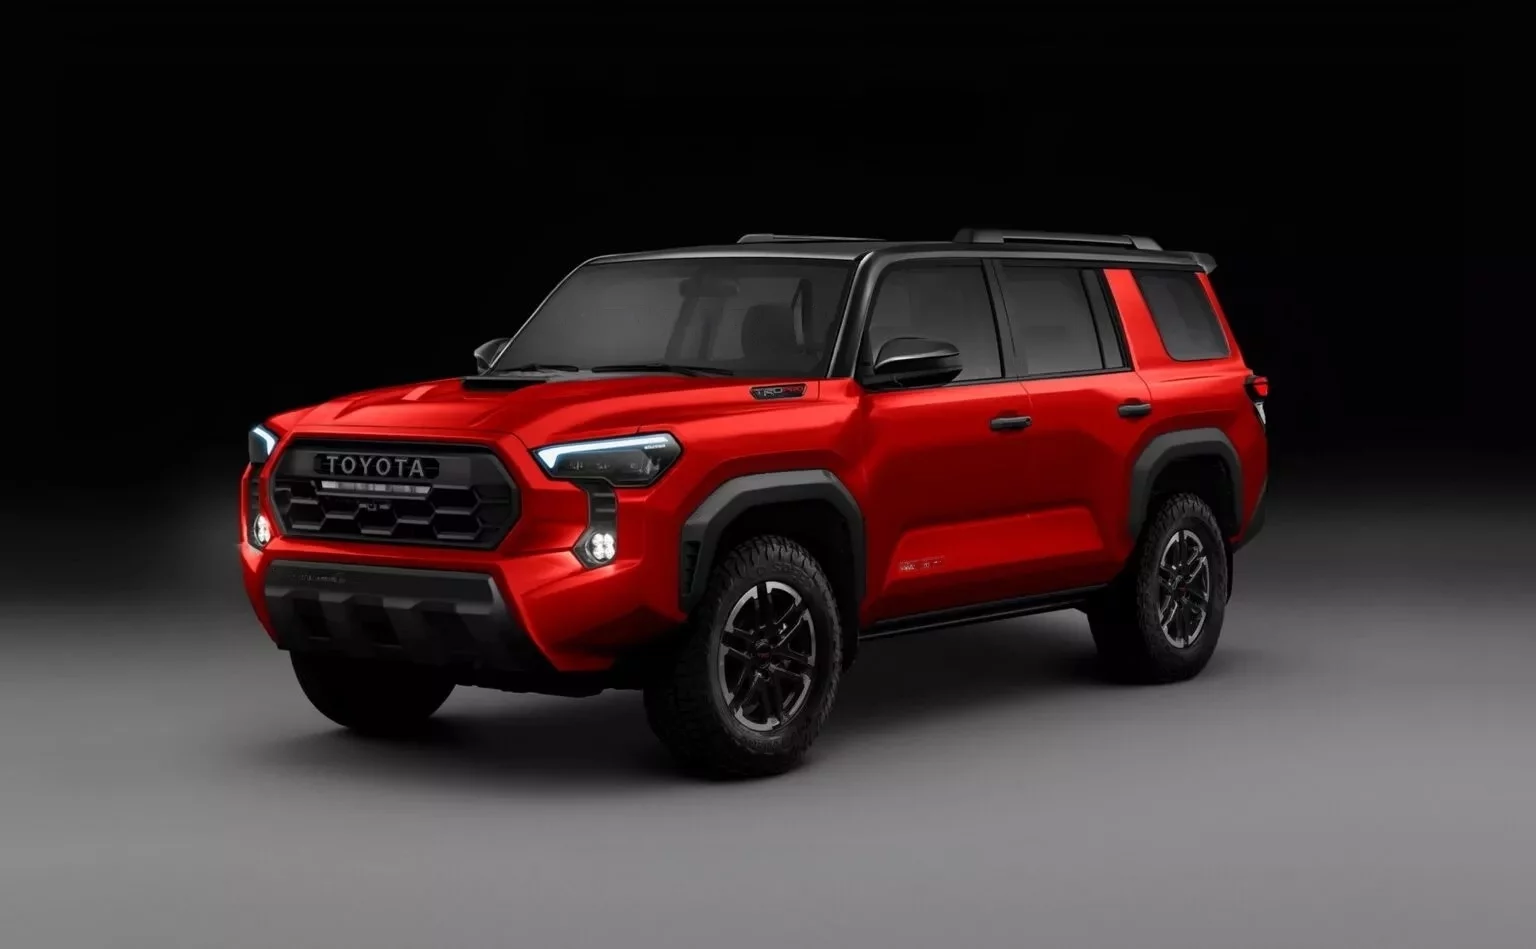 2025 Toyota 4Runner Prices, Reviews, and What to Expect The Tech